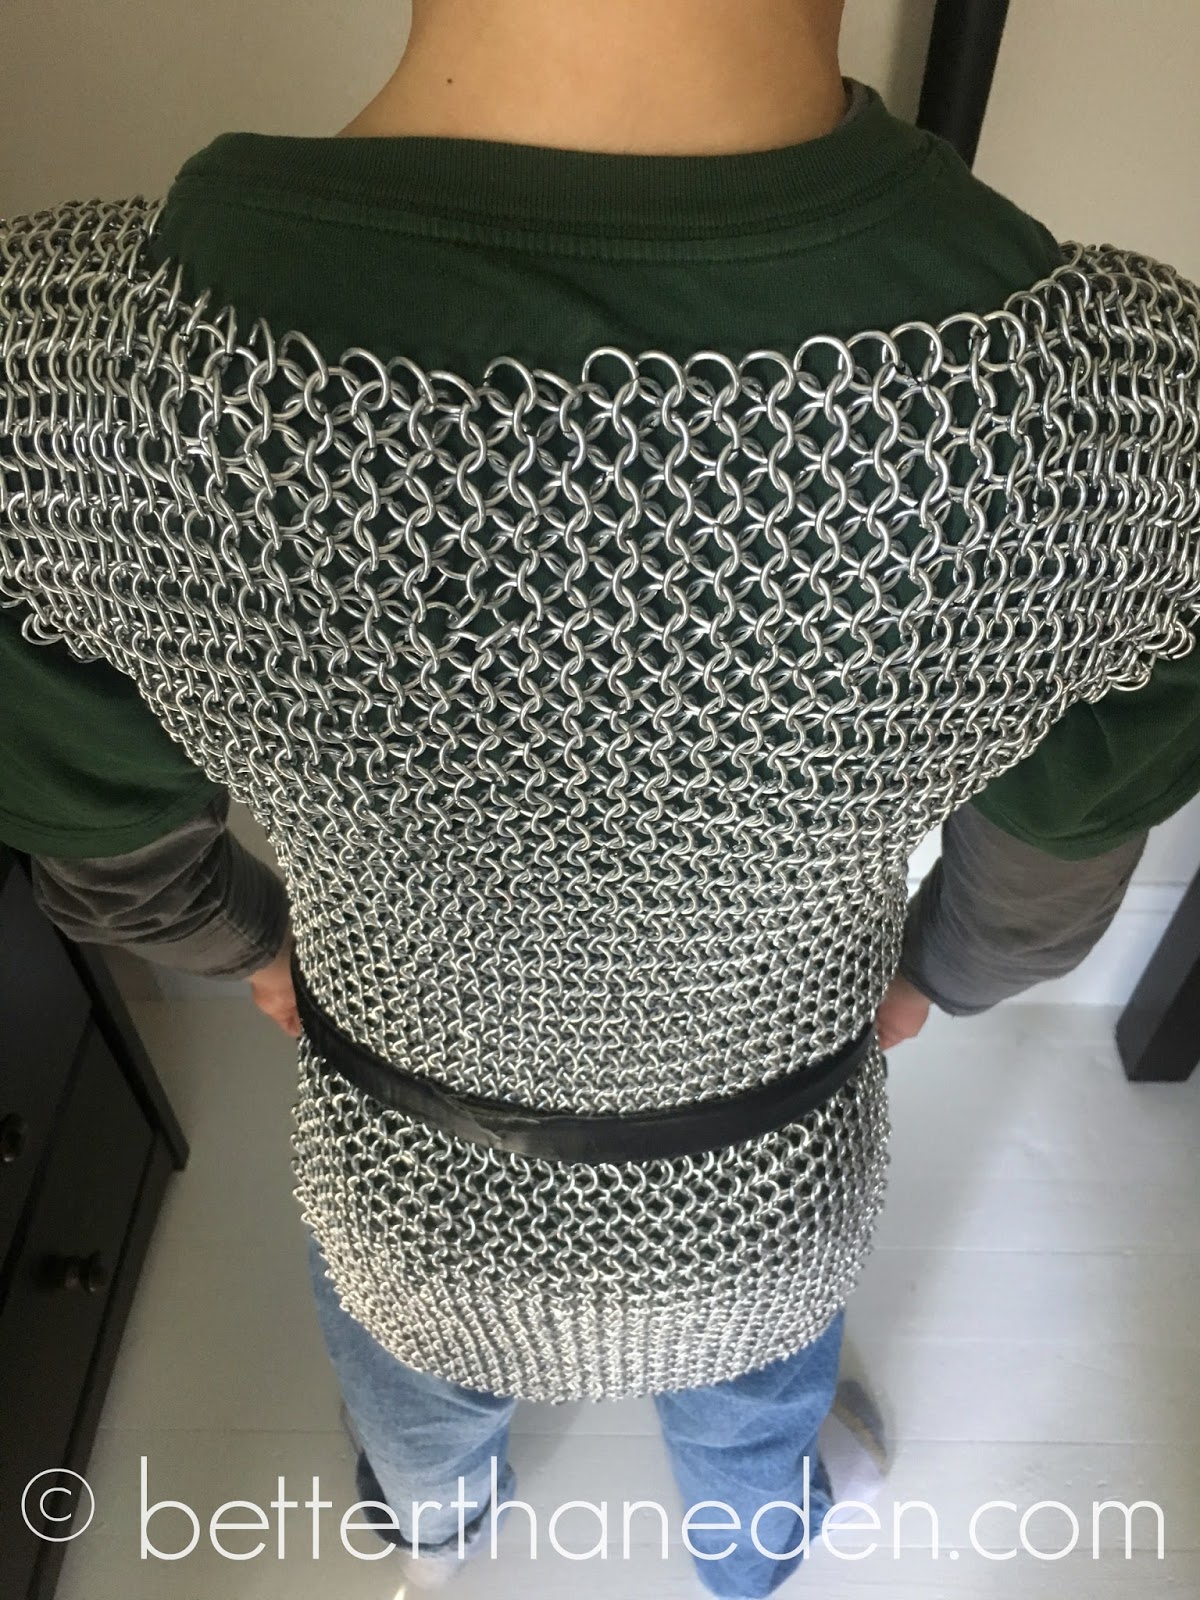 who invented chainmail